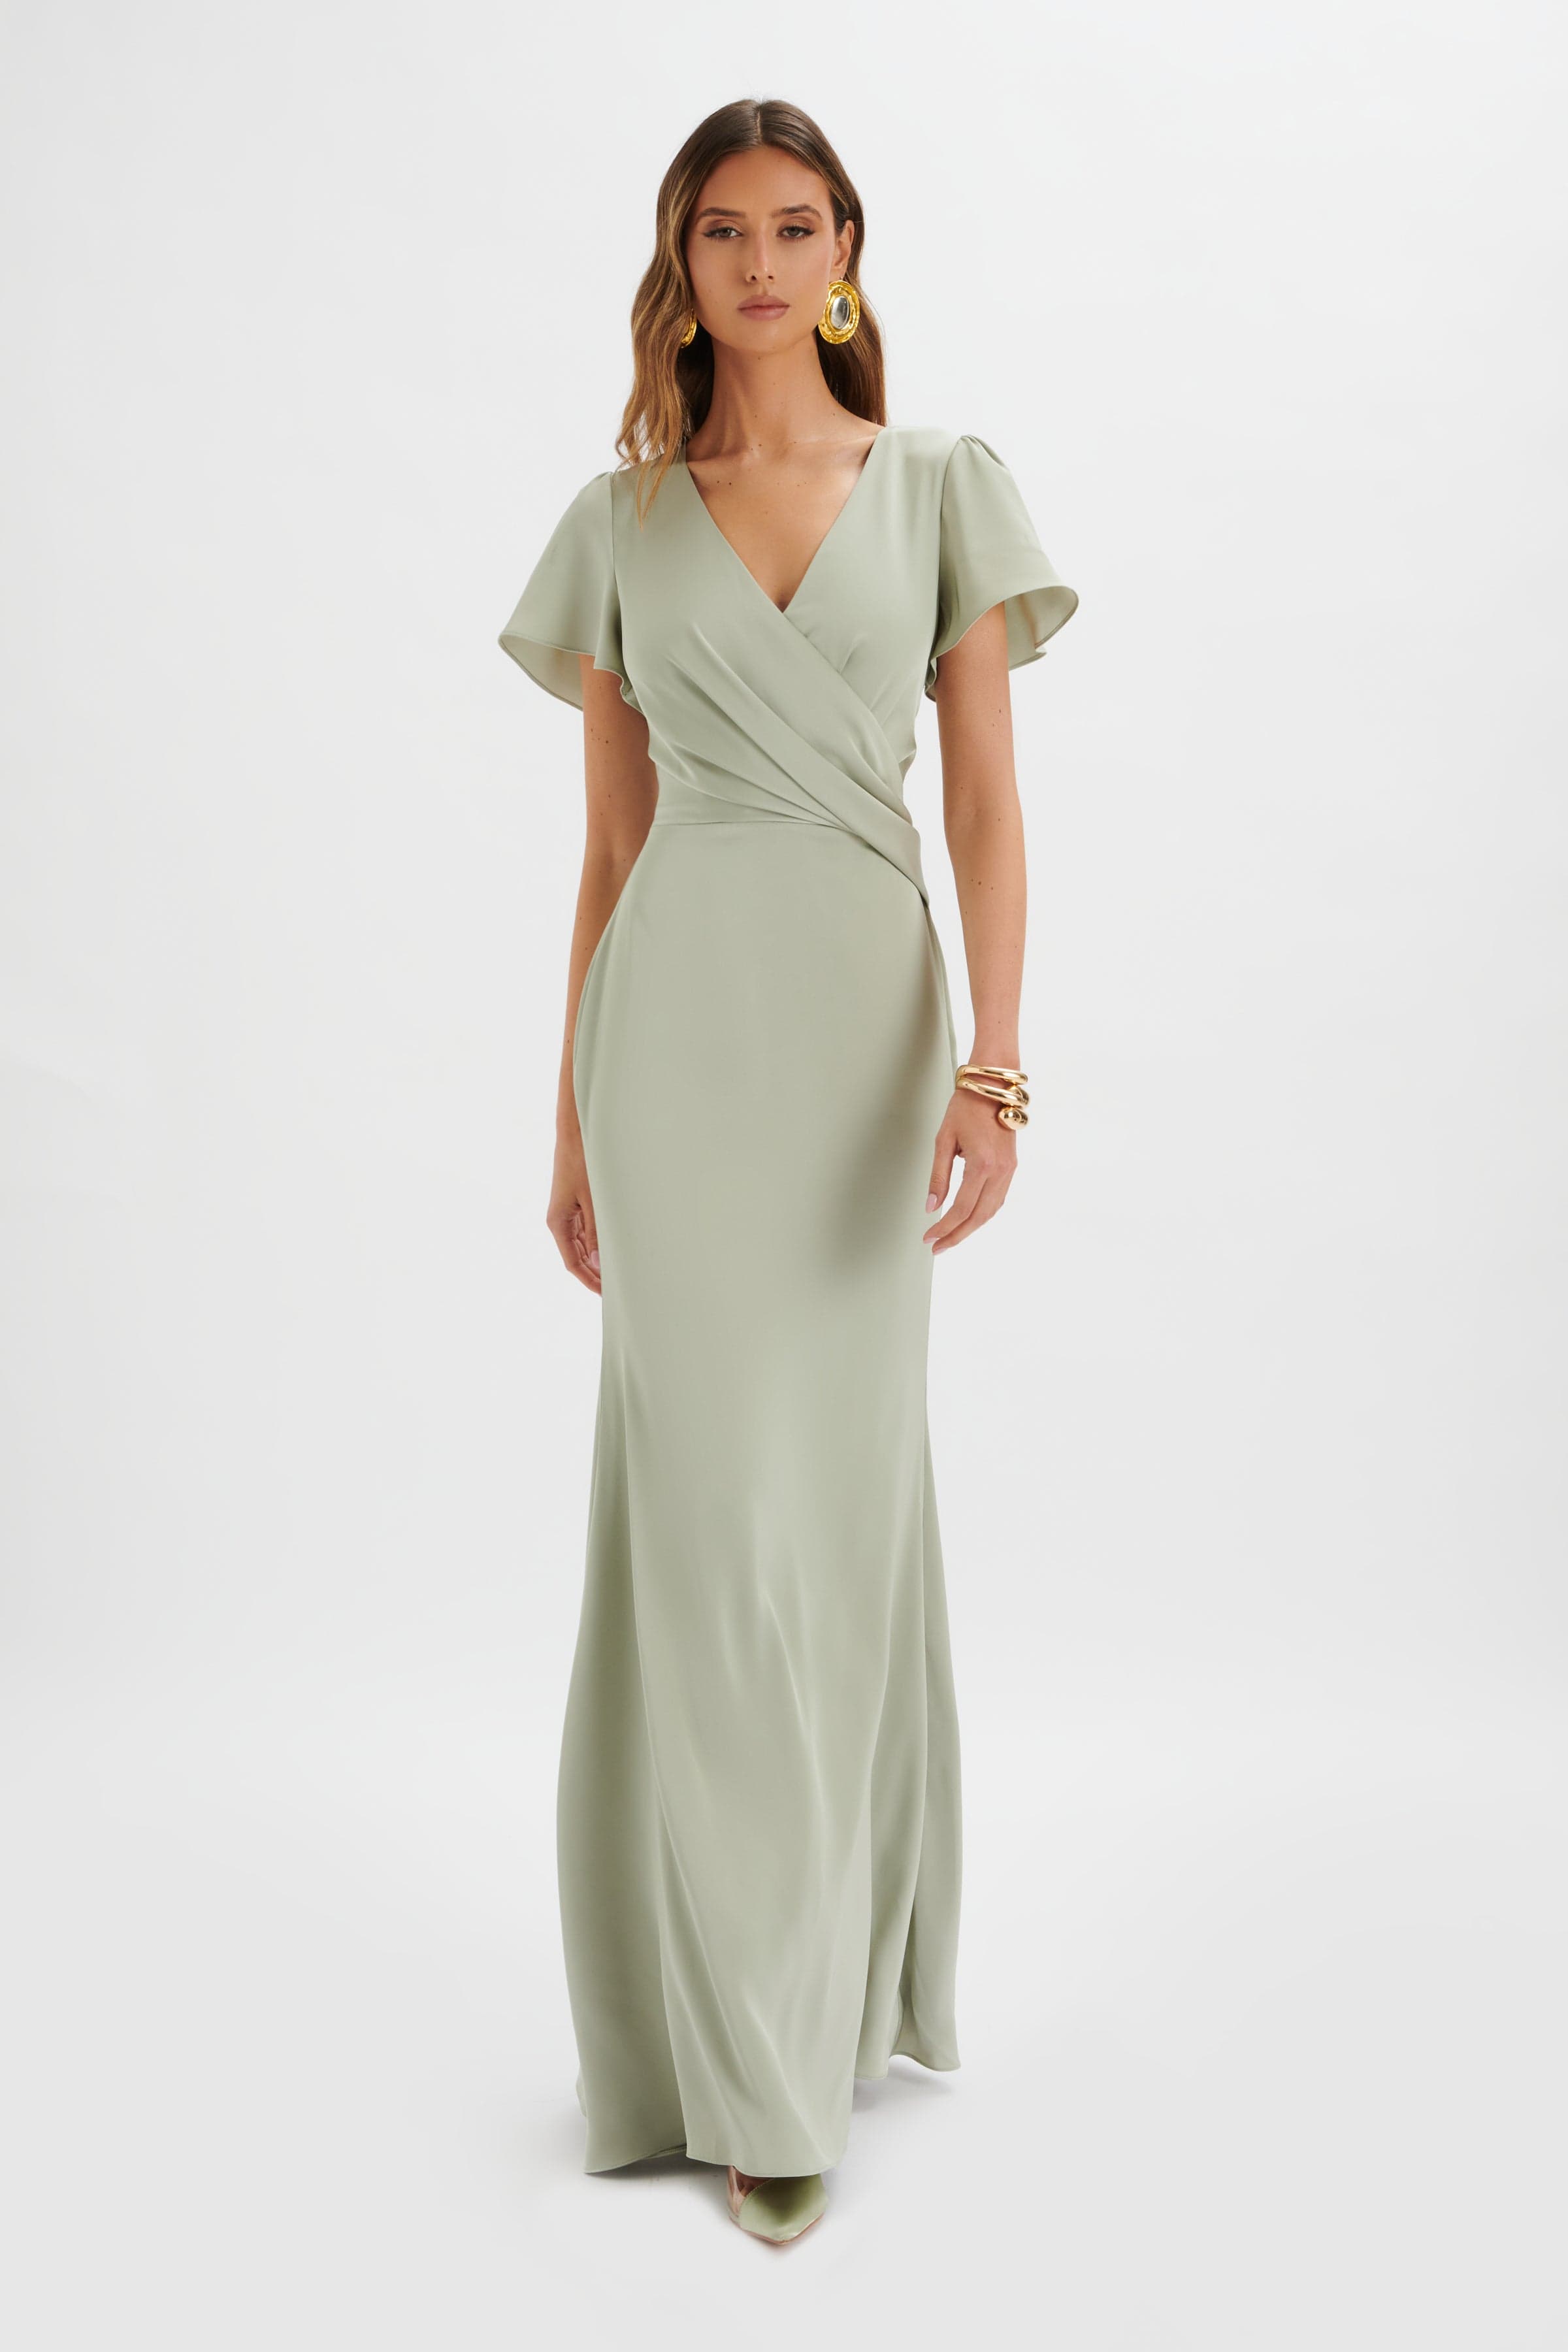 BEAU Draped Wrap Satin Maxi Dress with Sleeves in Sage Green